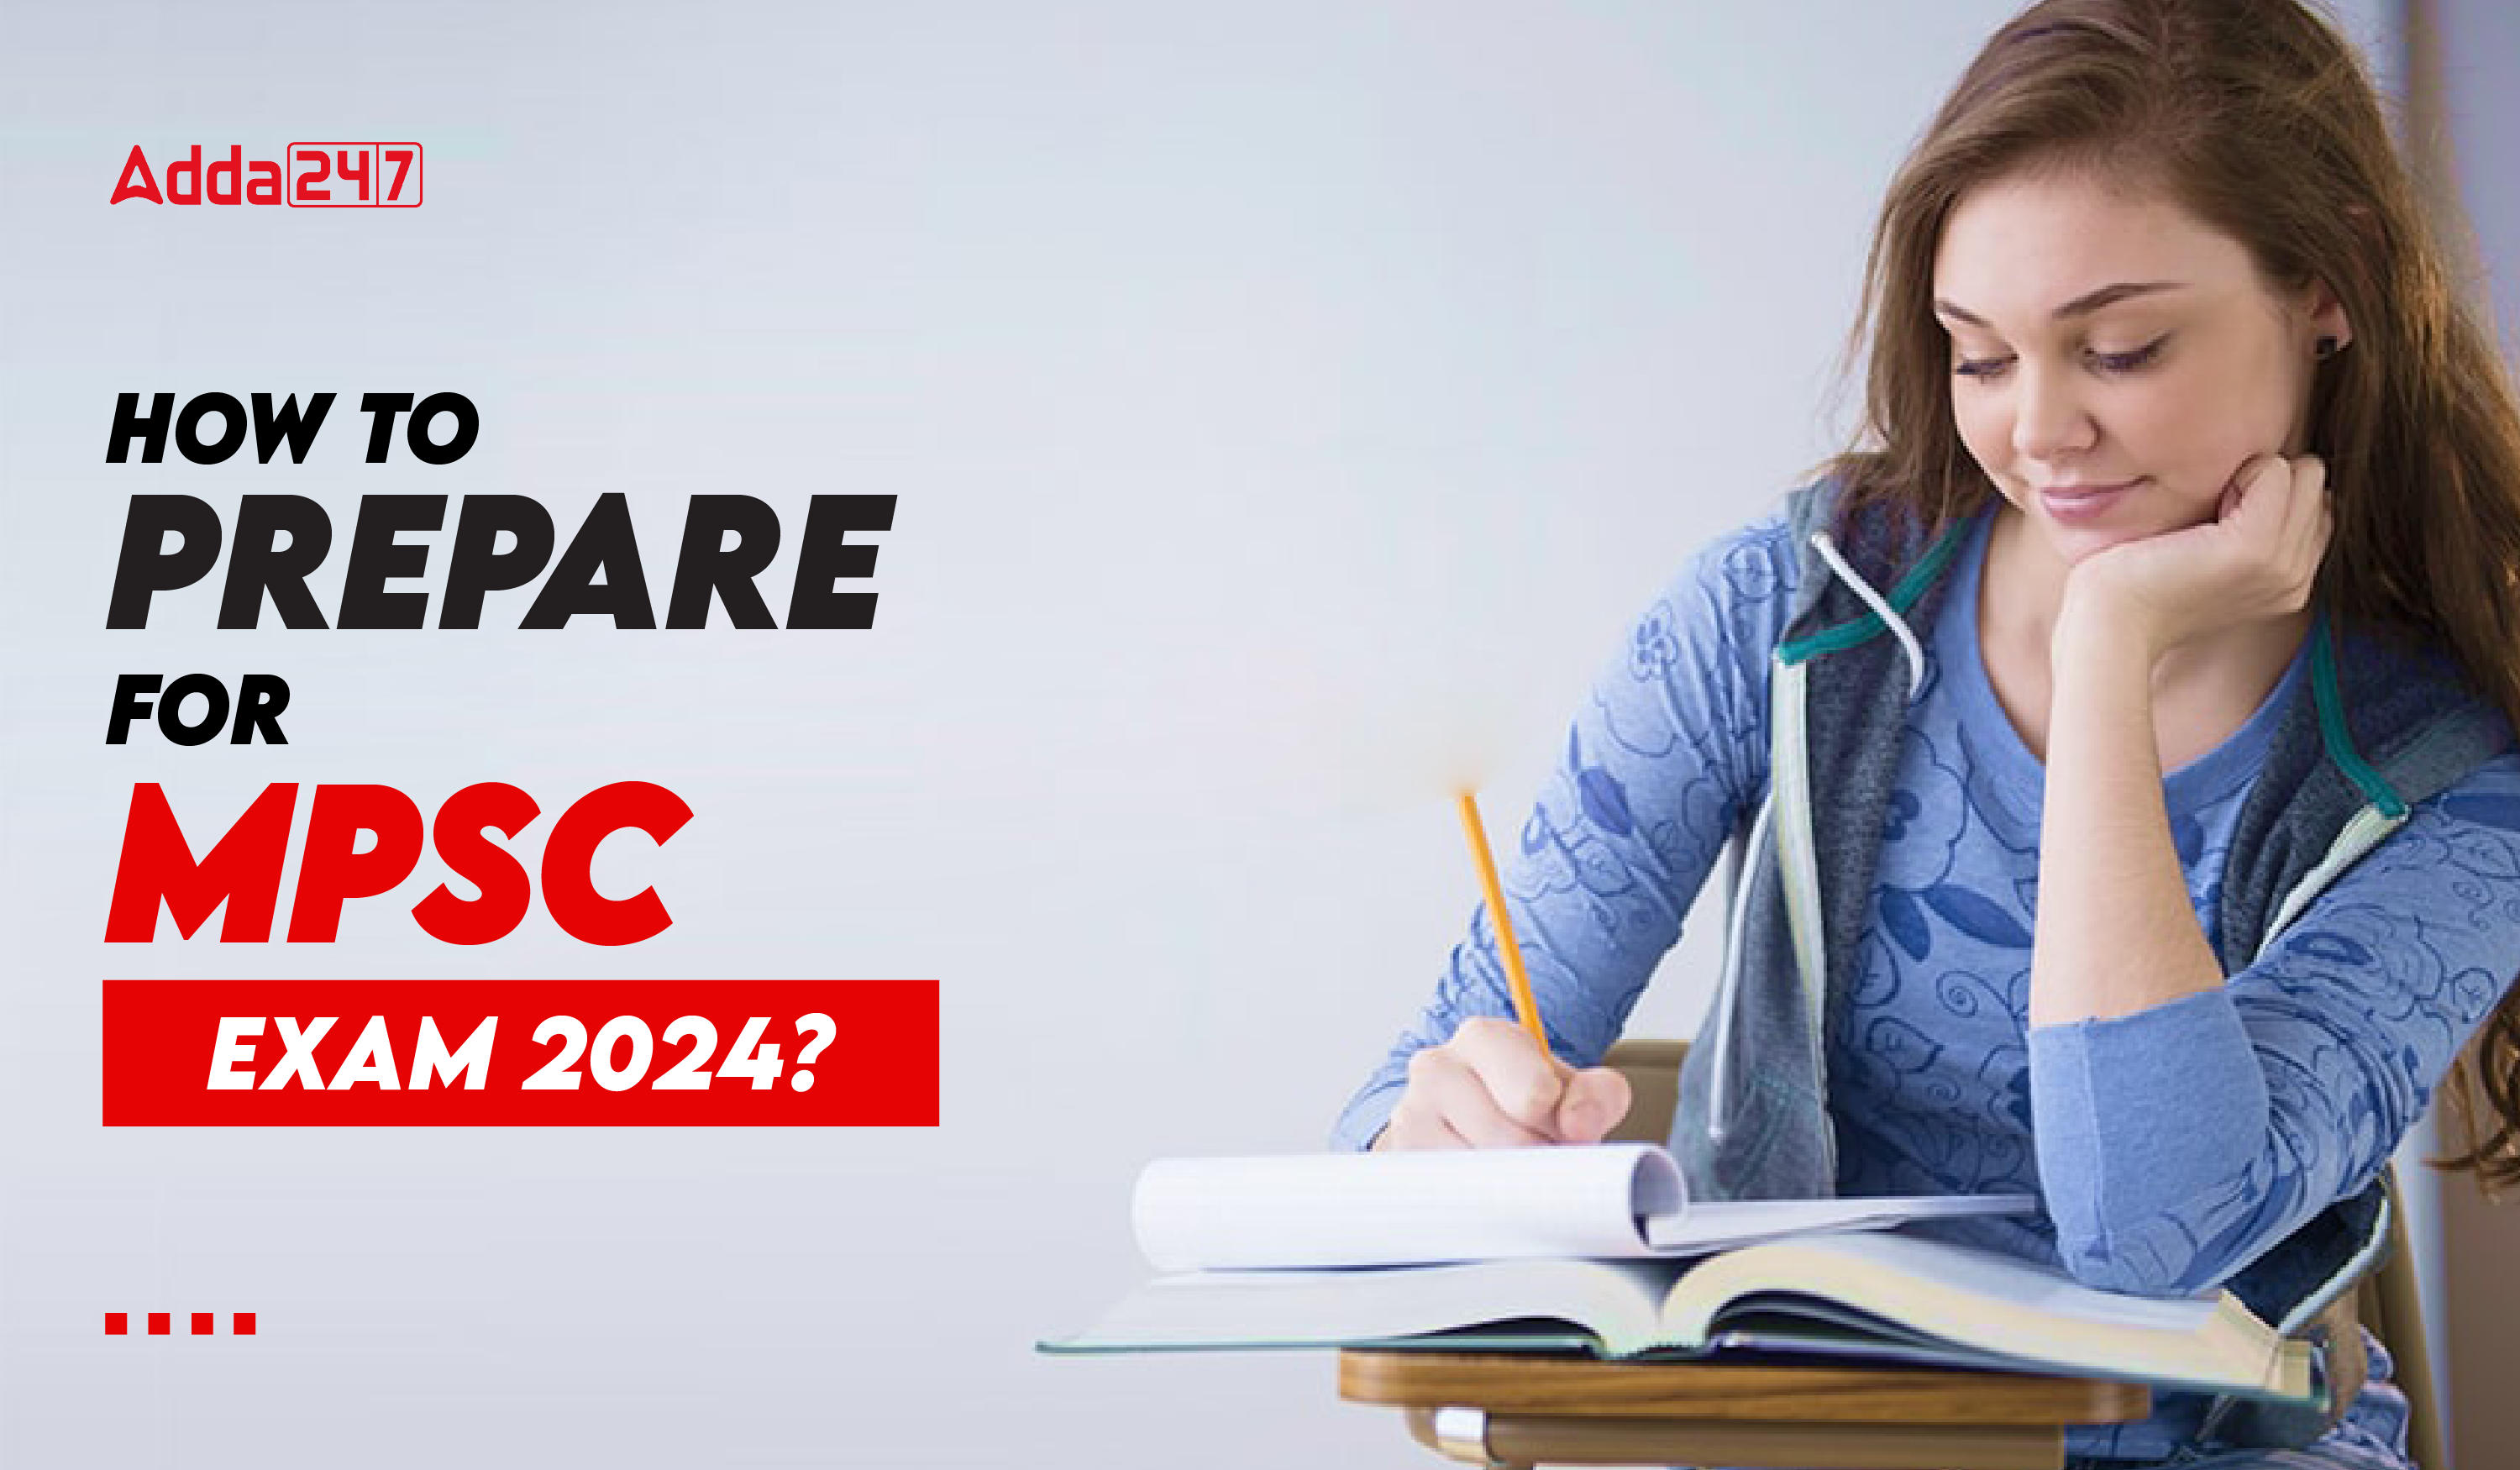 How to Prepare for MPSC Exam